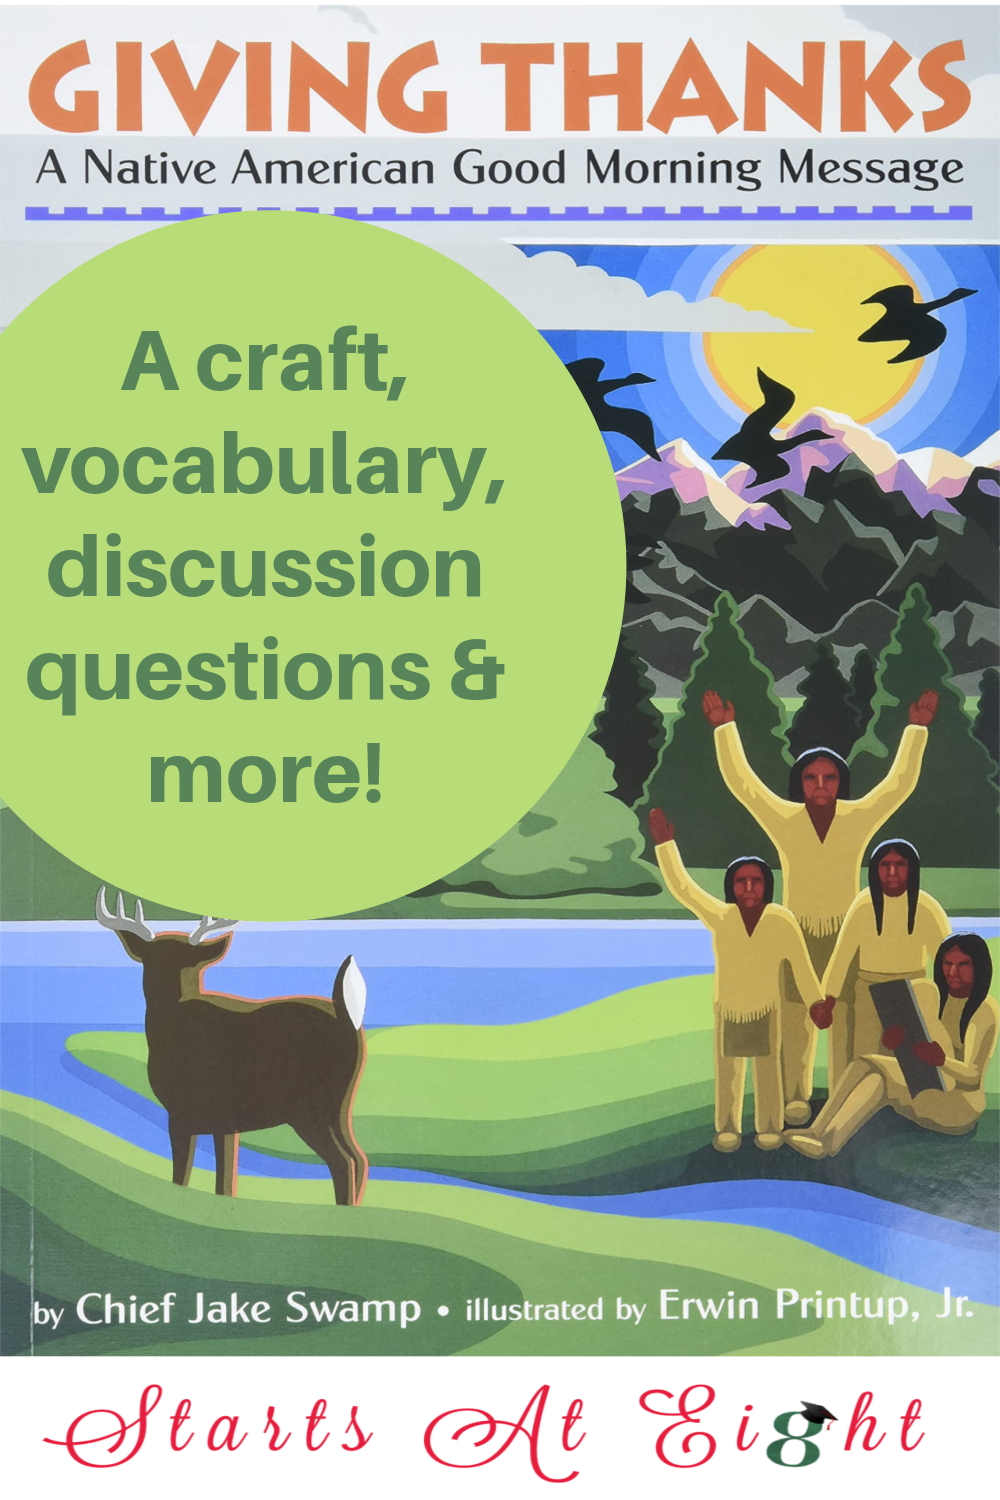 Giving Thanks: A Native American Good Morning Message includes activities surrounding this Iroquois message of peace and thanksgiving. Crafts, vocab, and more!